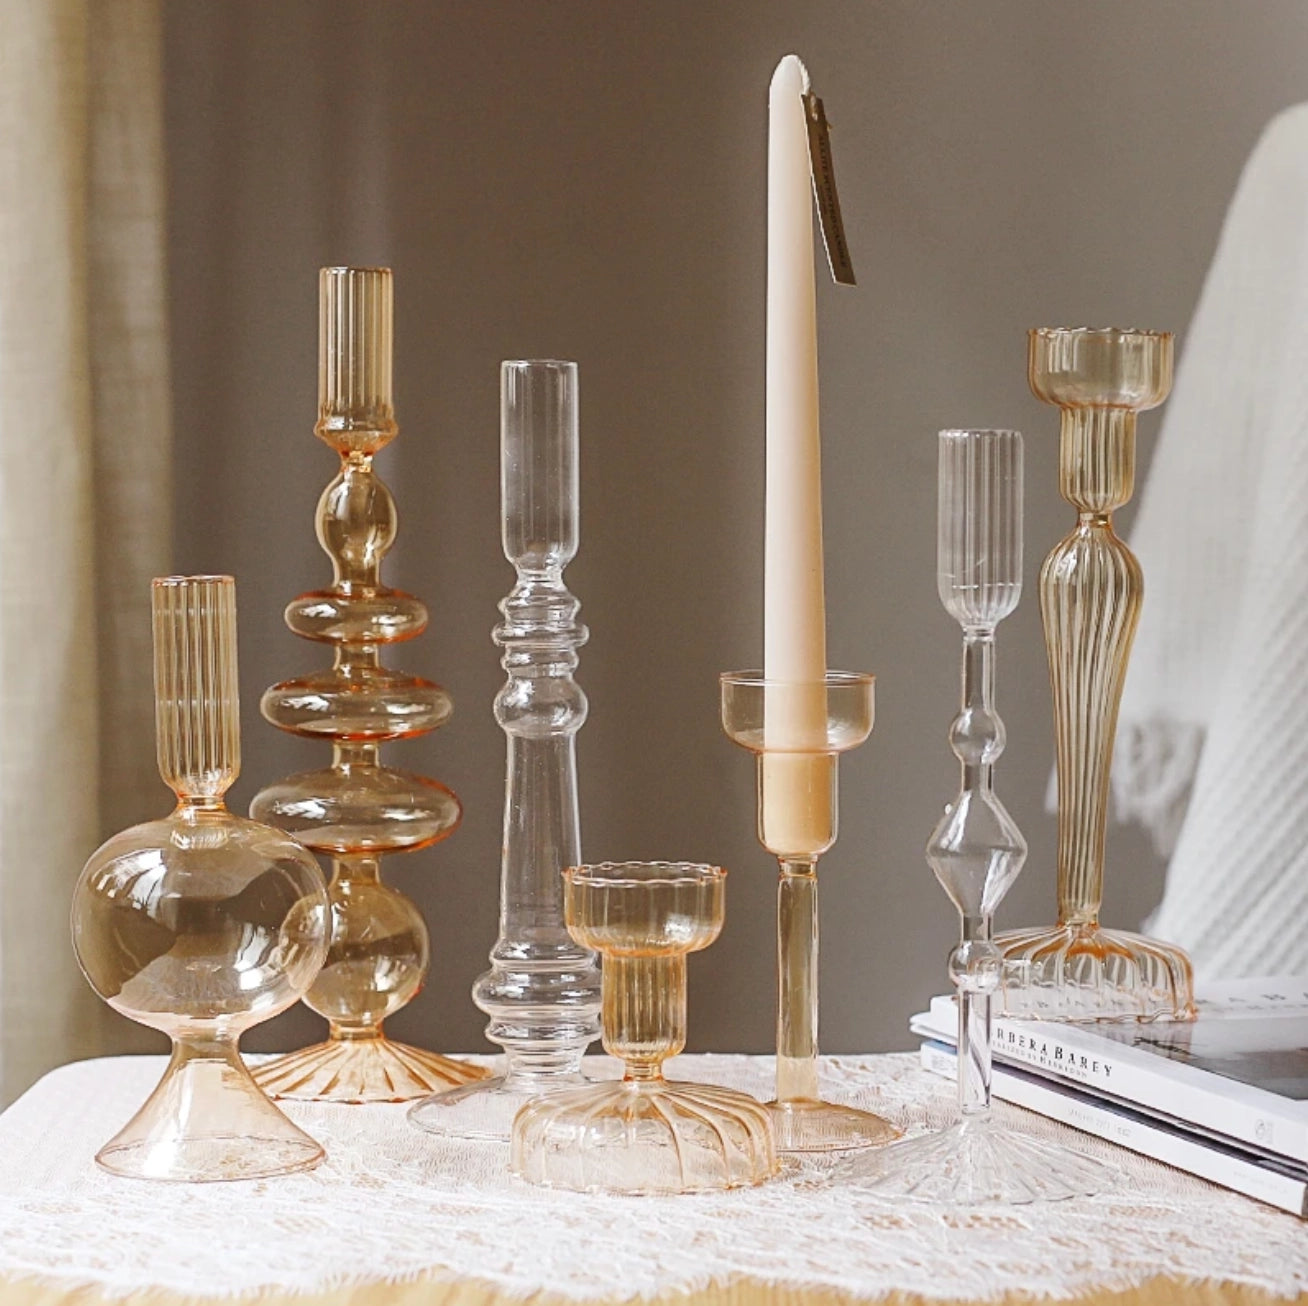 Vintage-Inspired Candle Holders